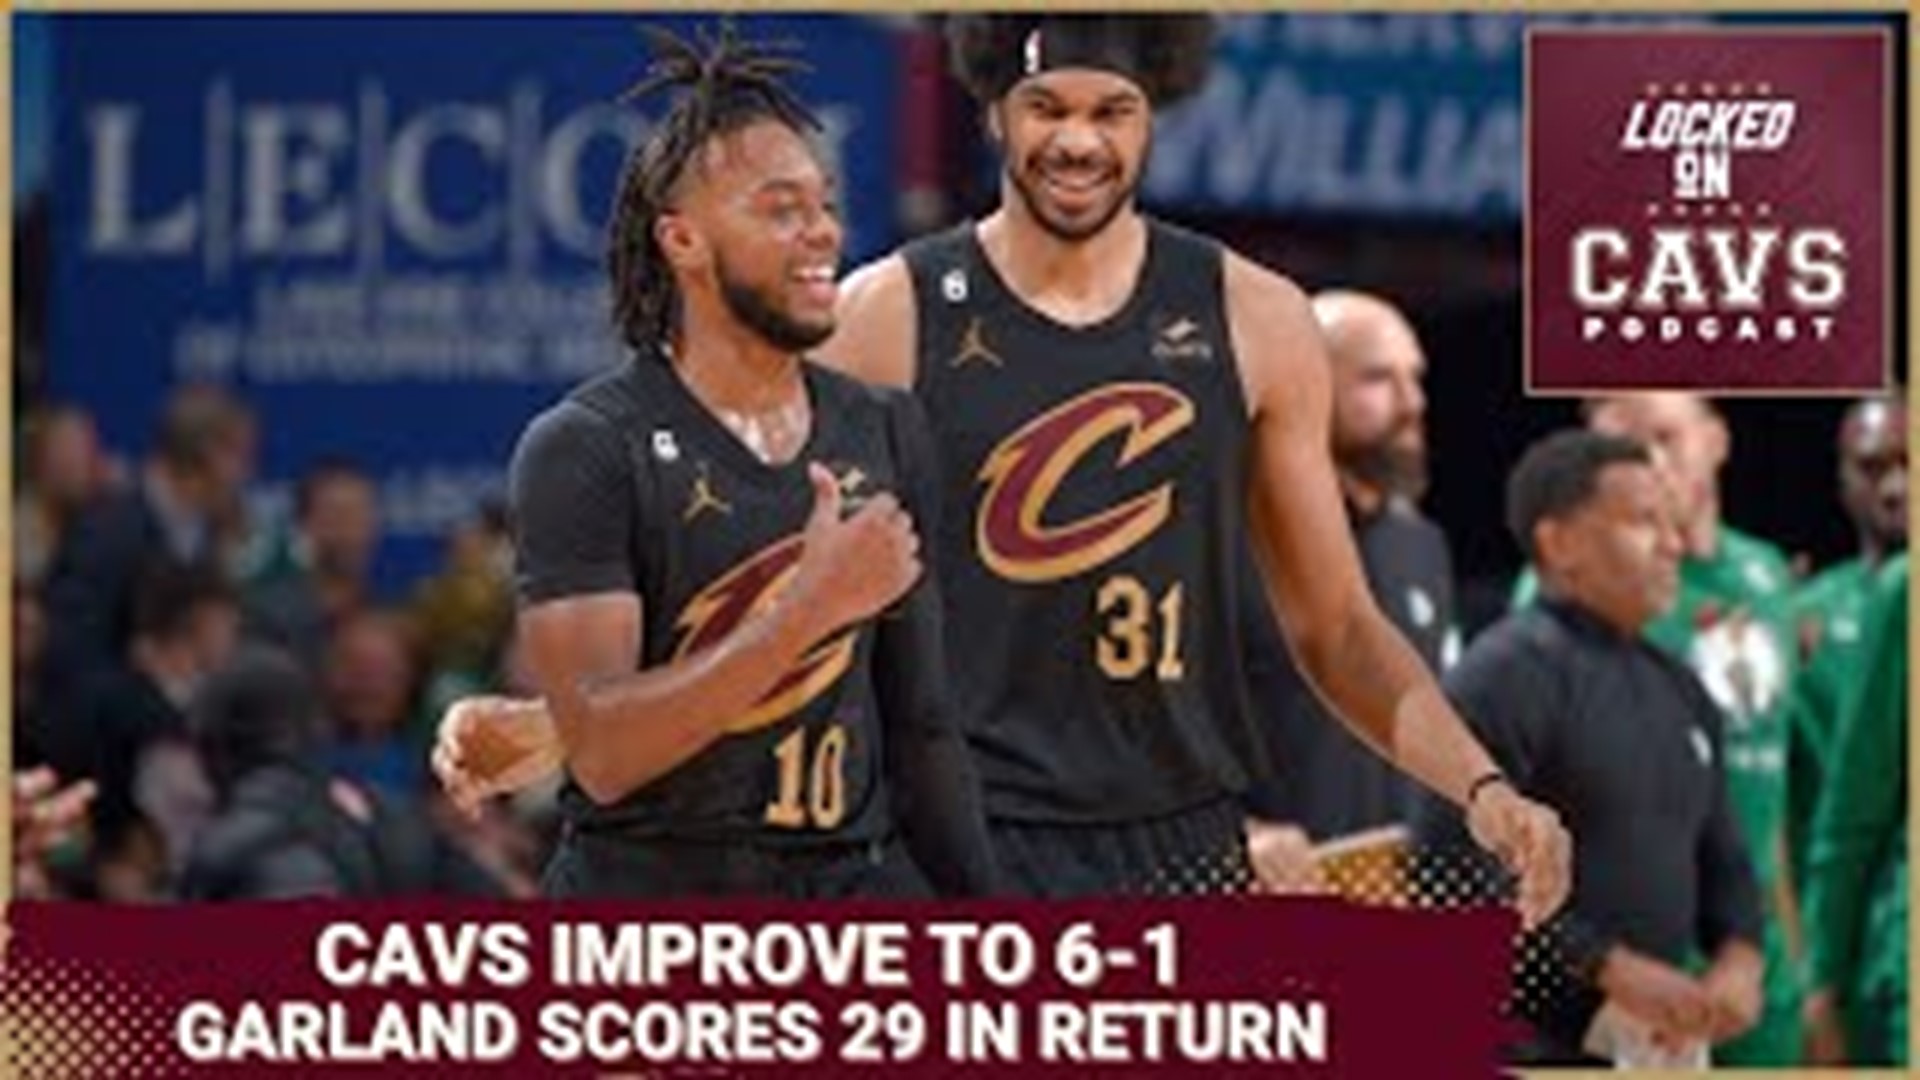 The return of Darius Garland and the Cavs getting to 2-0 against the Celtics.